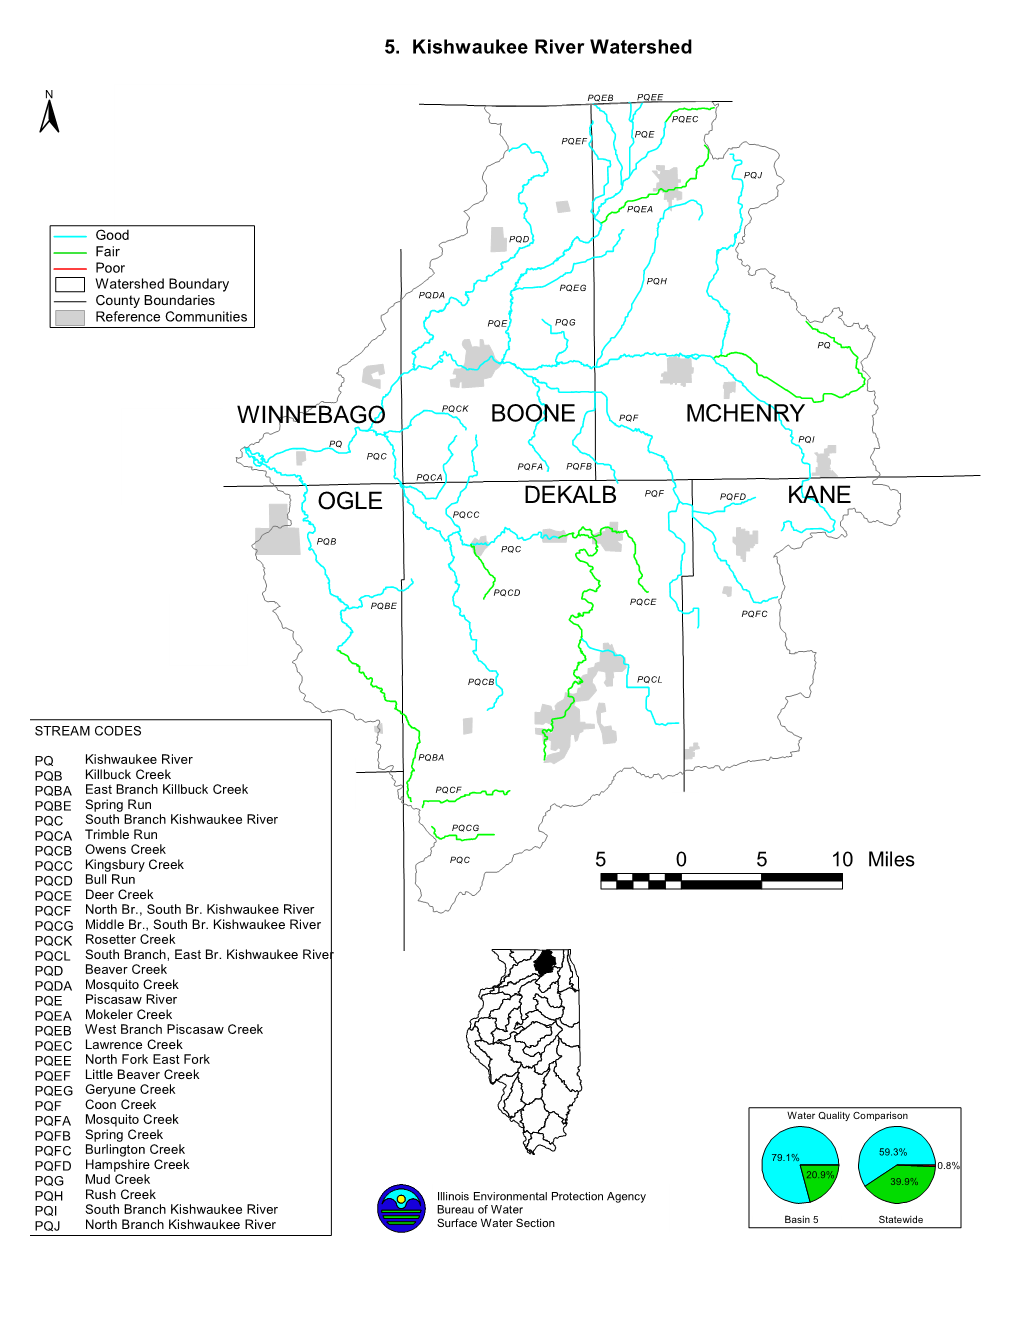 Lakes in the Kishwaukee River Watershed